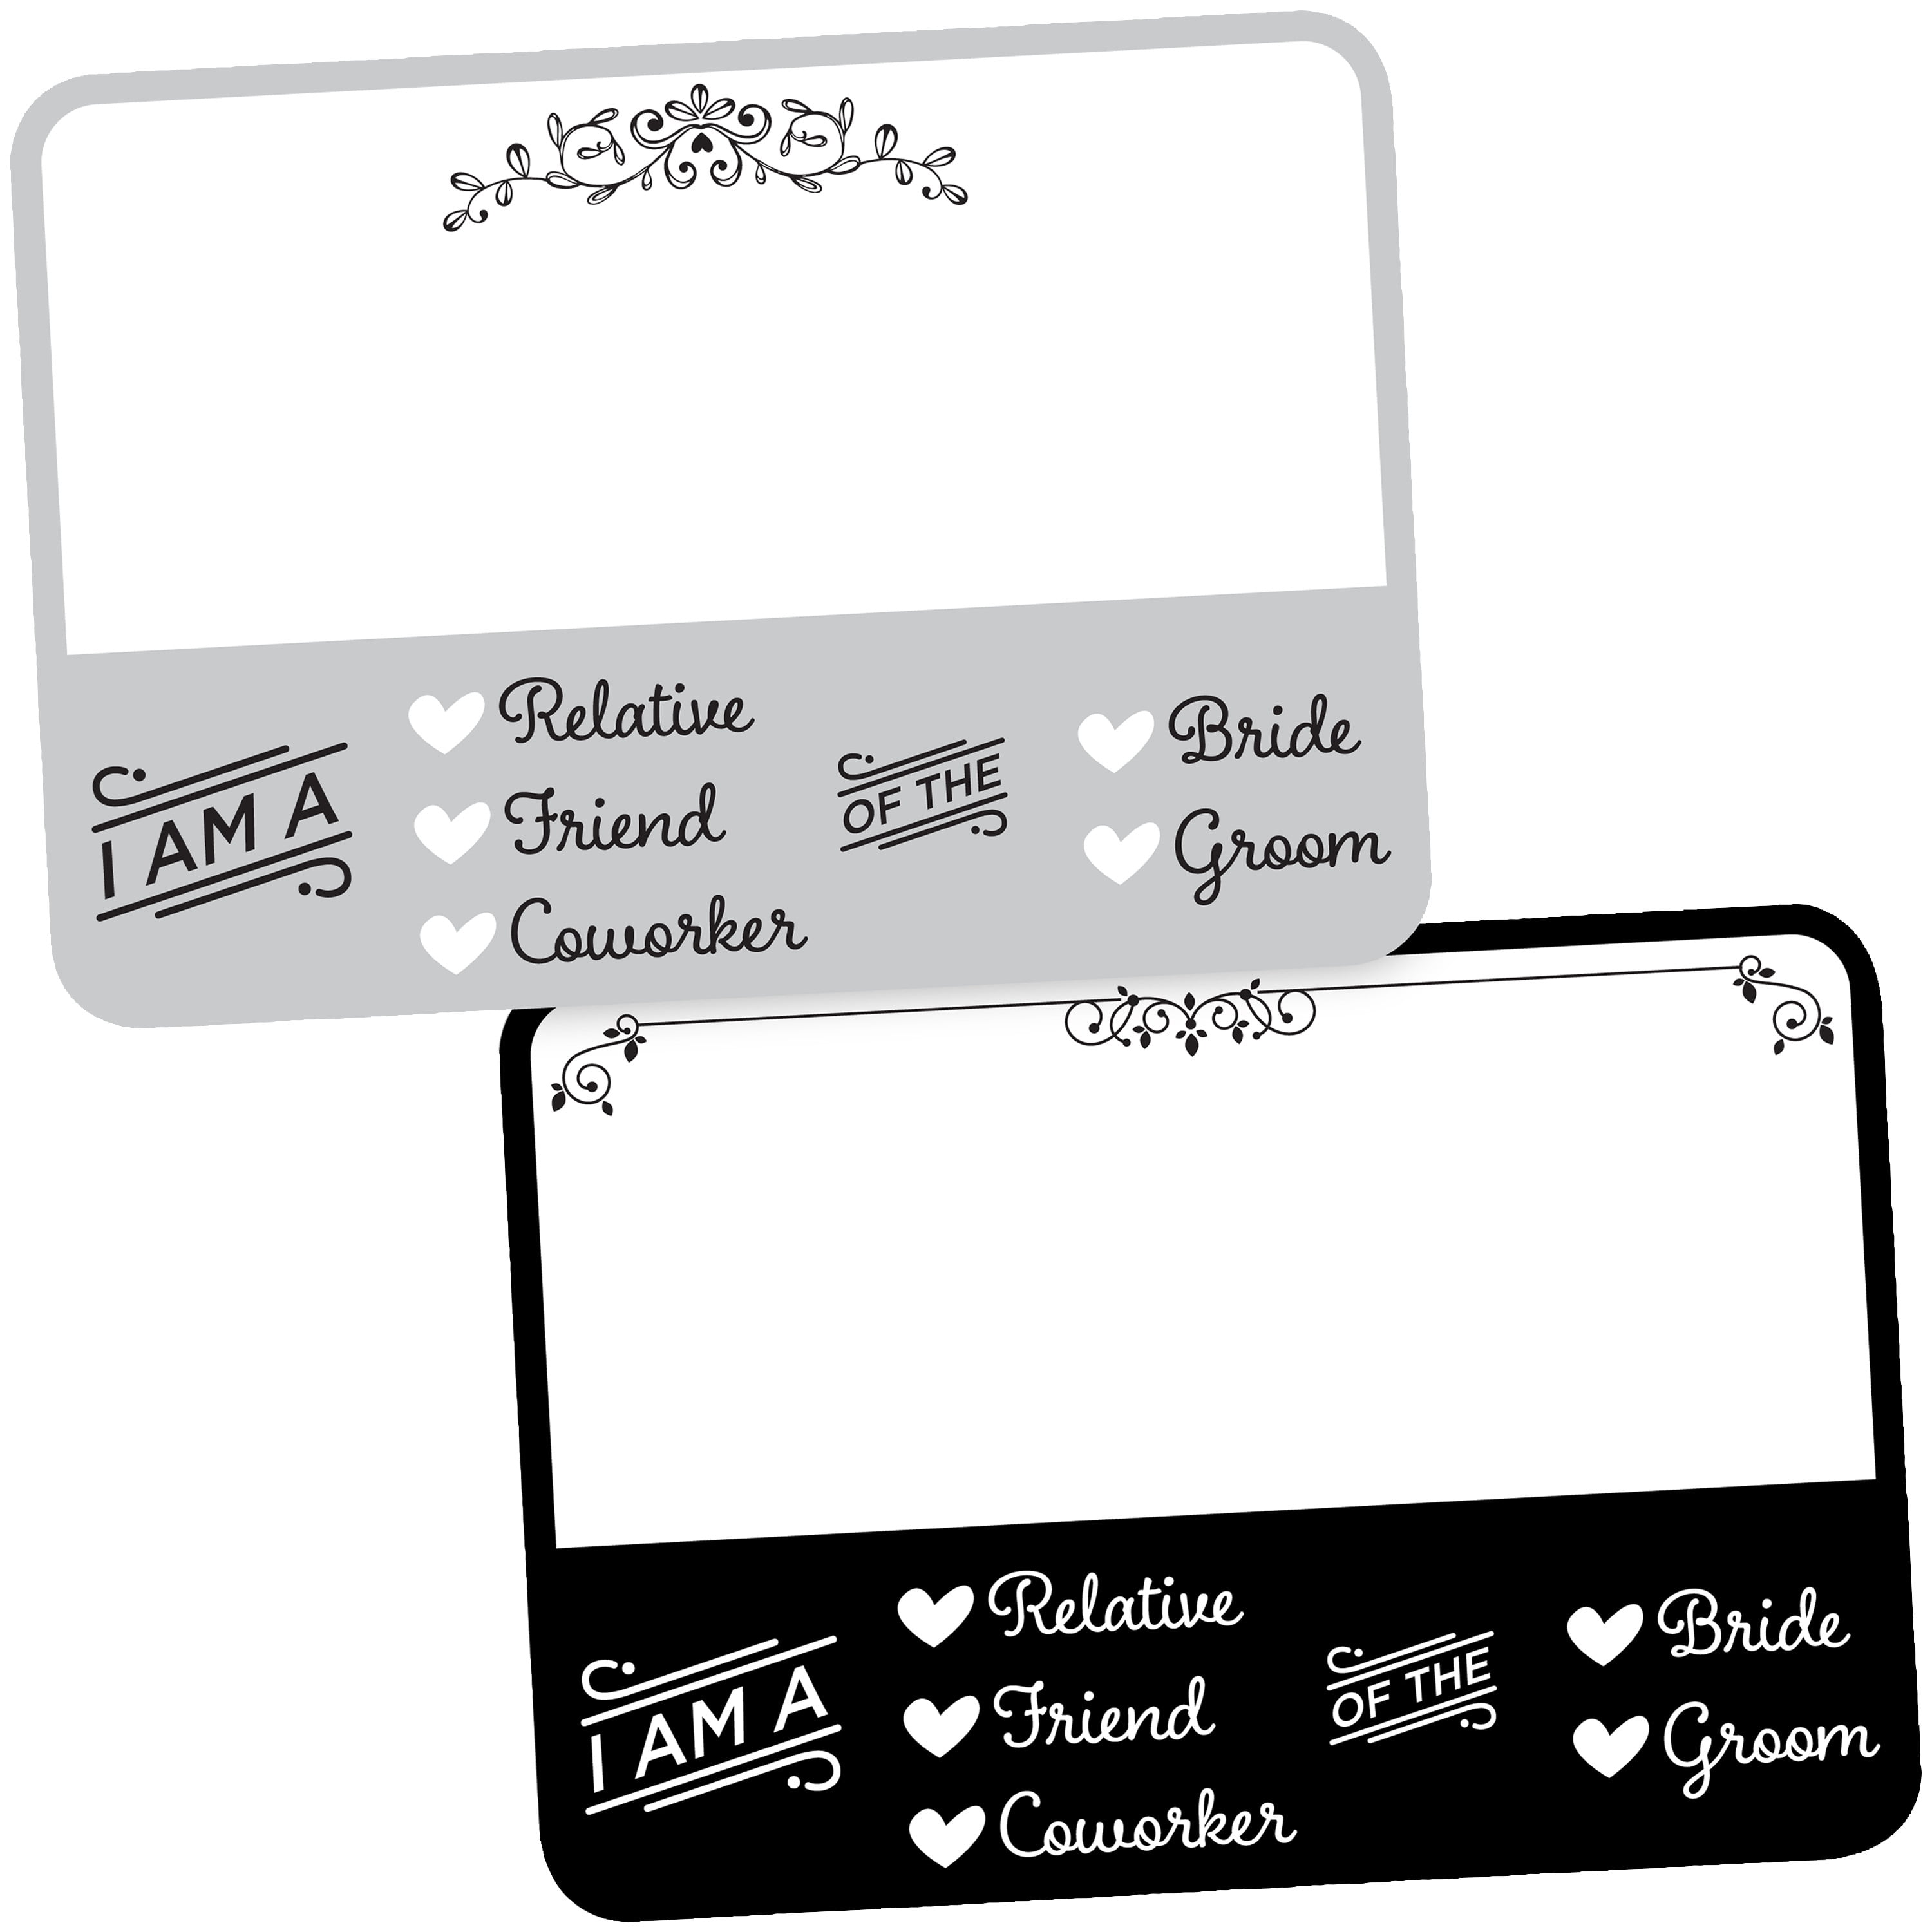 Metallic Foil Stickers Personalised Labels Business/company Name Stickers  37mm Personalise With Your Own Logo or Use Our Templates 